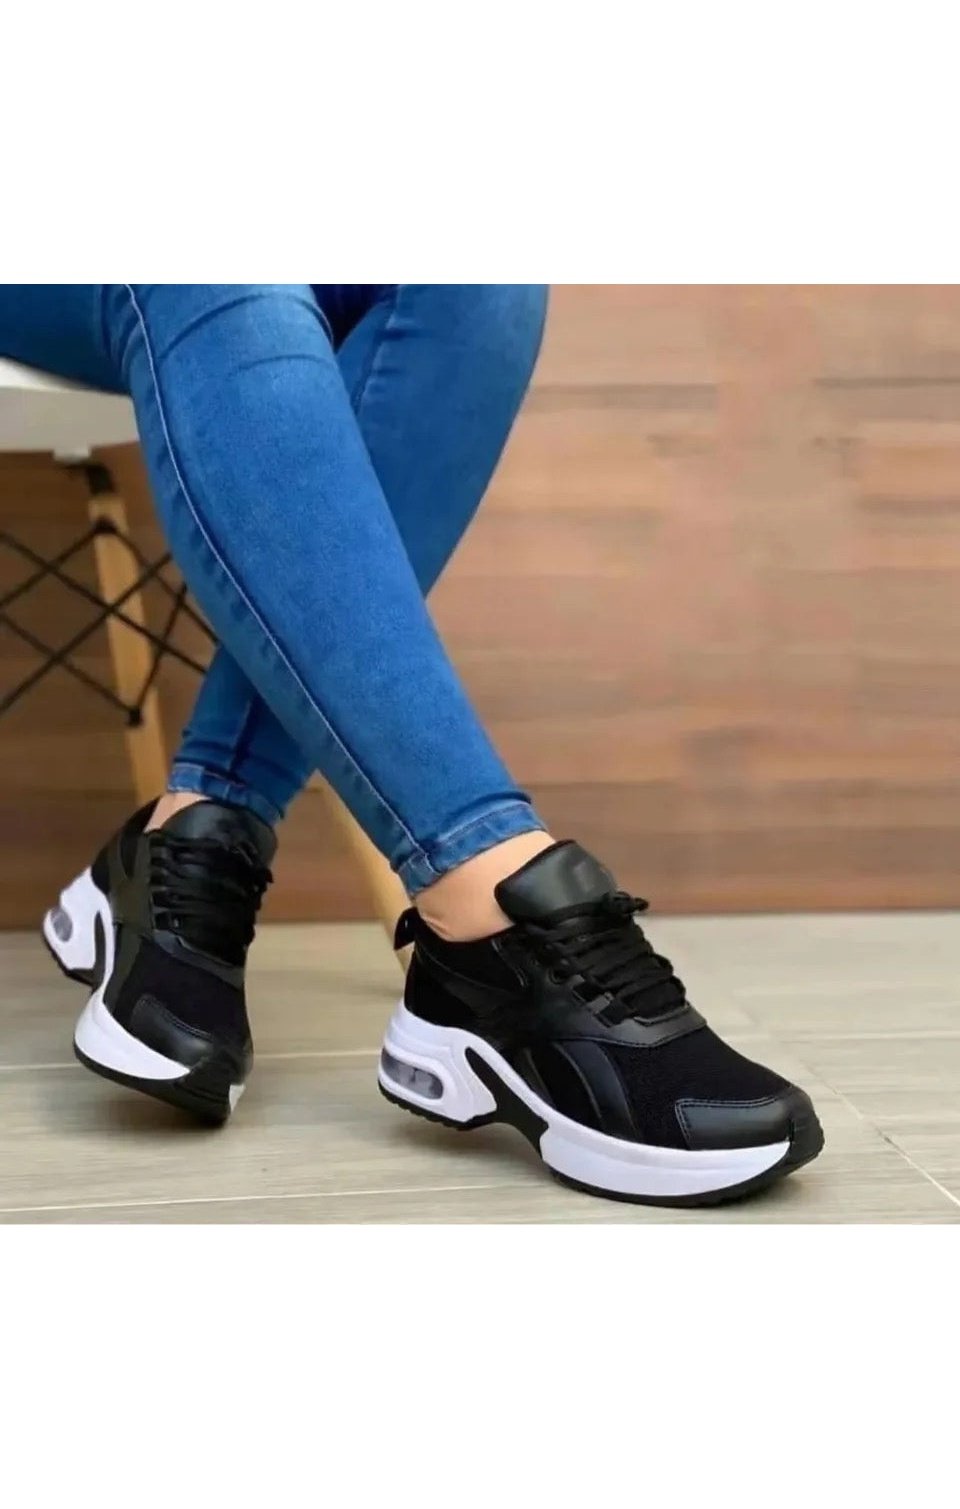 Women’s Running Sneakers Shoes ( 4 Colors)